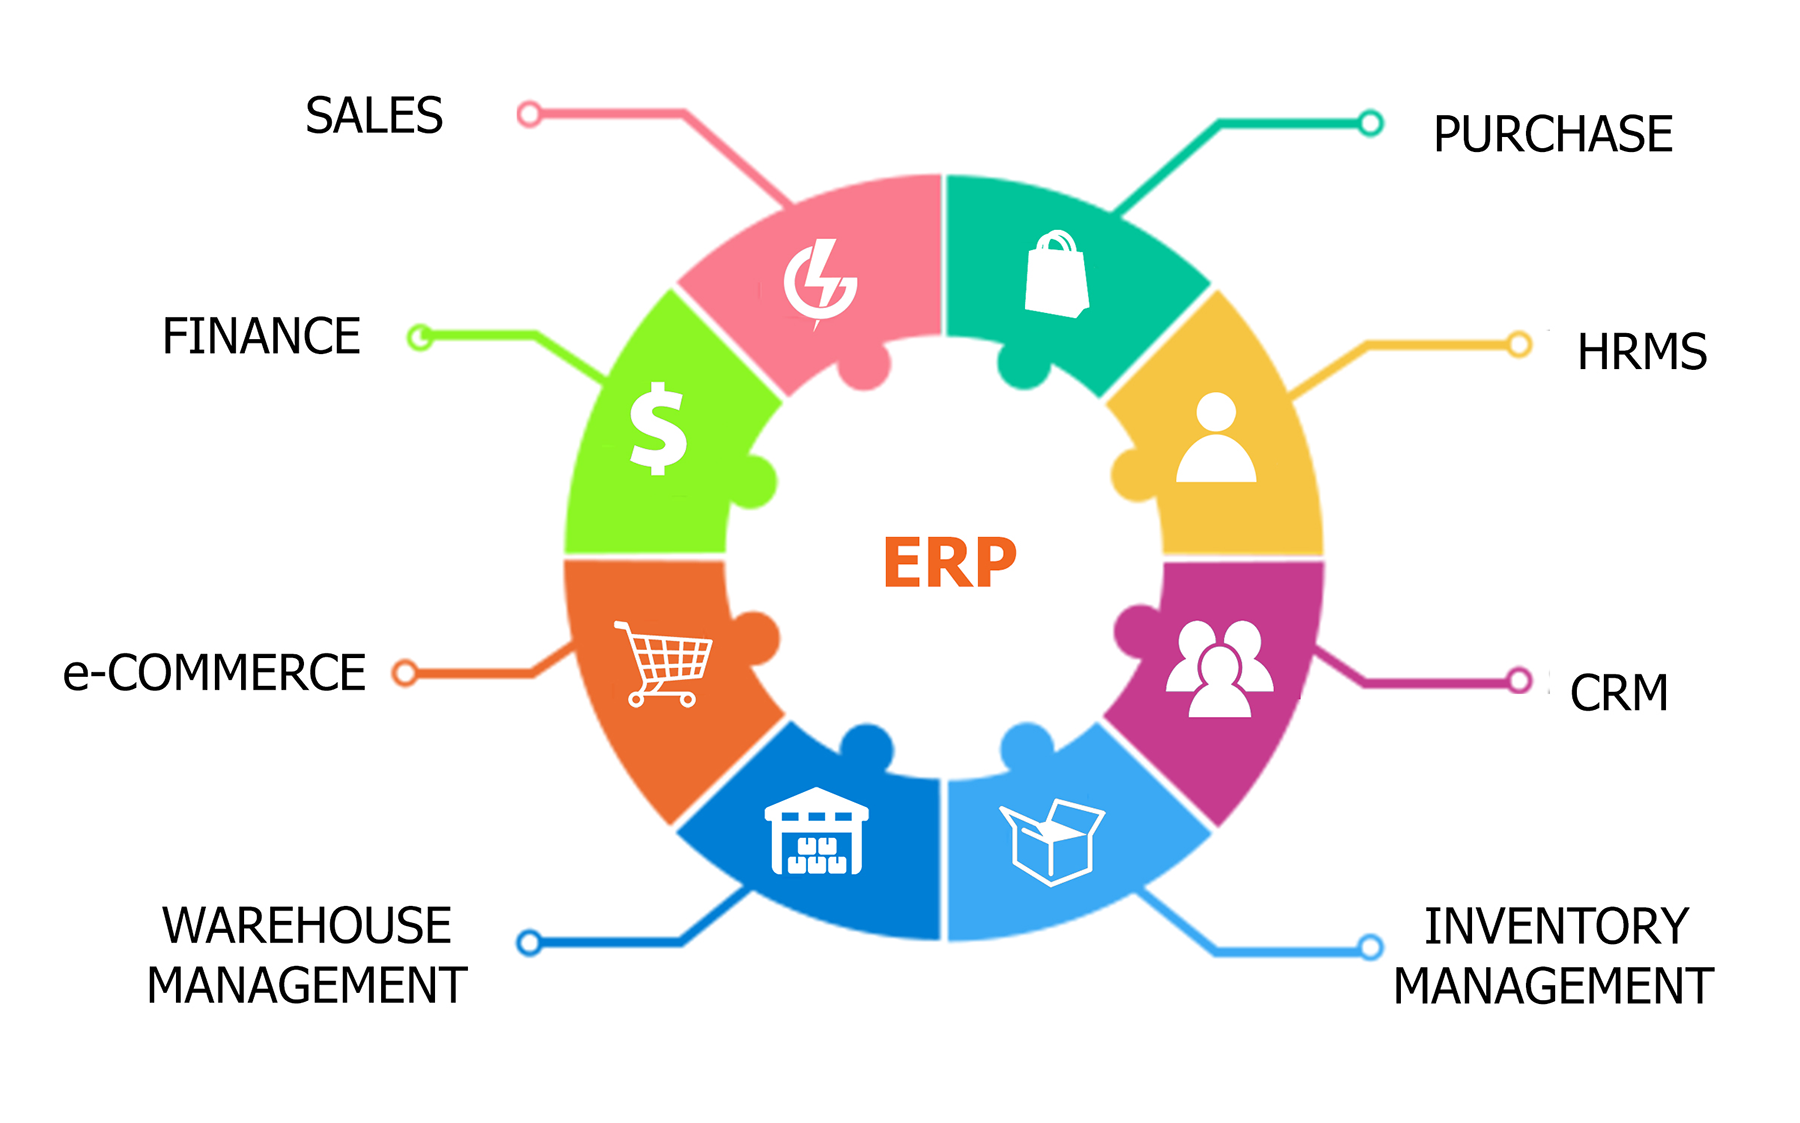 Enterprise Resource Planning (ERP) Software Market Growing Trends and Technology forecast 2019 to 2025